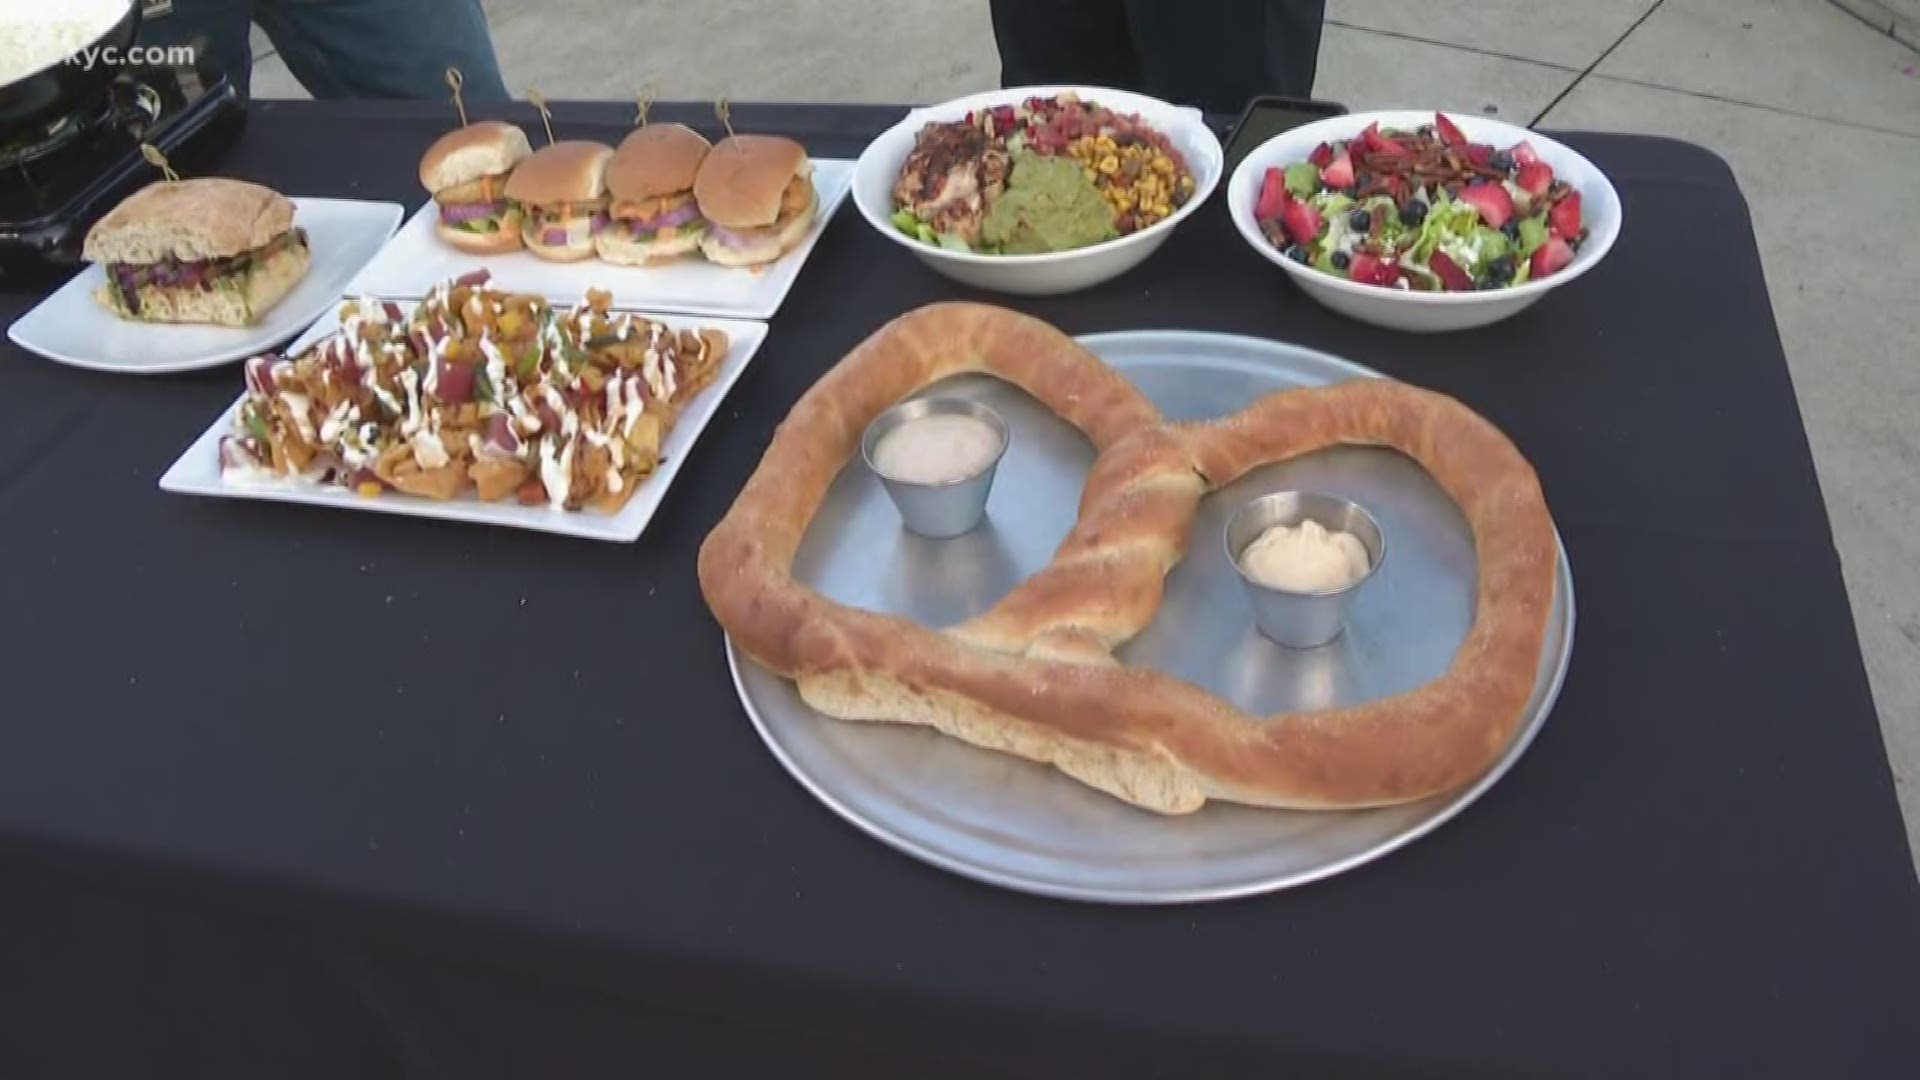 June 21, 2019: Hungry? Merwin's Wharf is a legendary Cleveland restaurant with some of the best food -- and views -- in town. We get a special look at some of their most popular dishes, including their unforgettable giant pretzels.